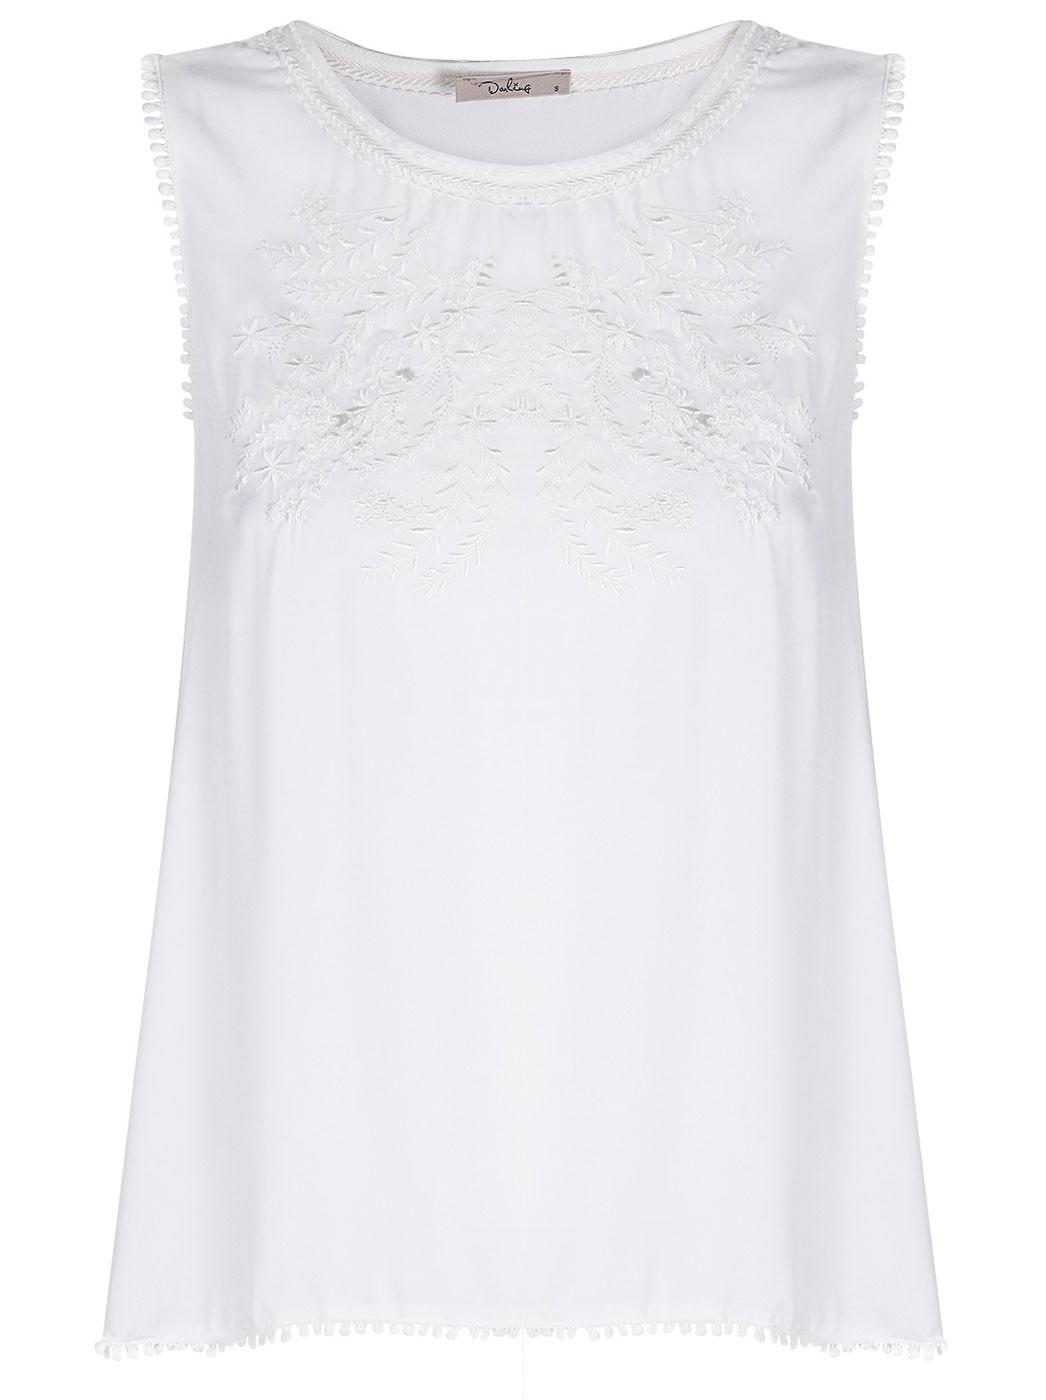 Darling Abbie Retro Vintage inspired Embroidered Top in White